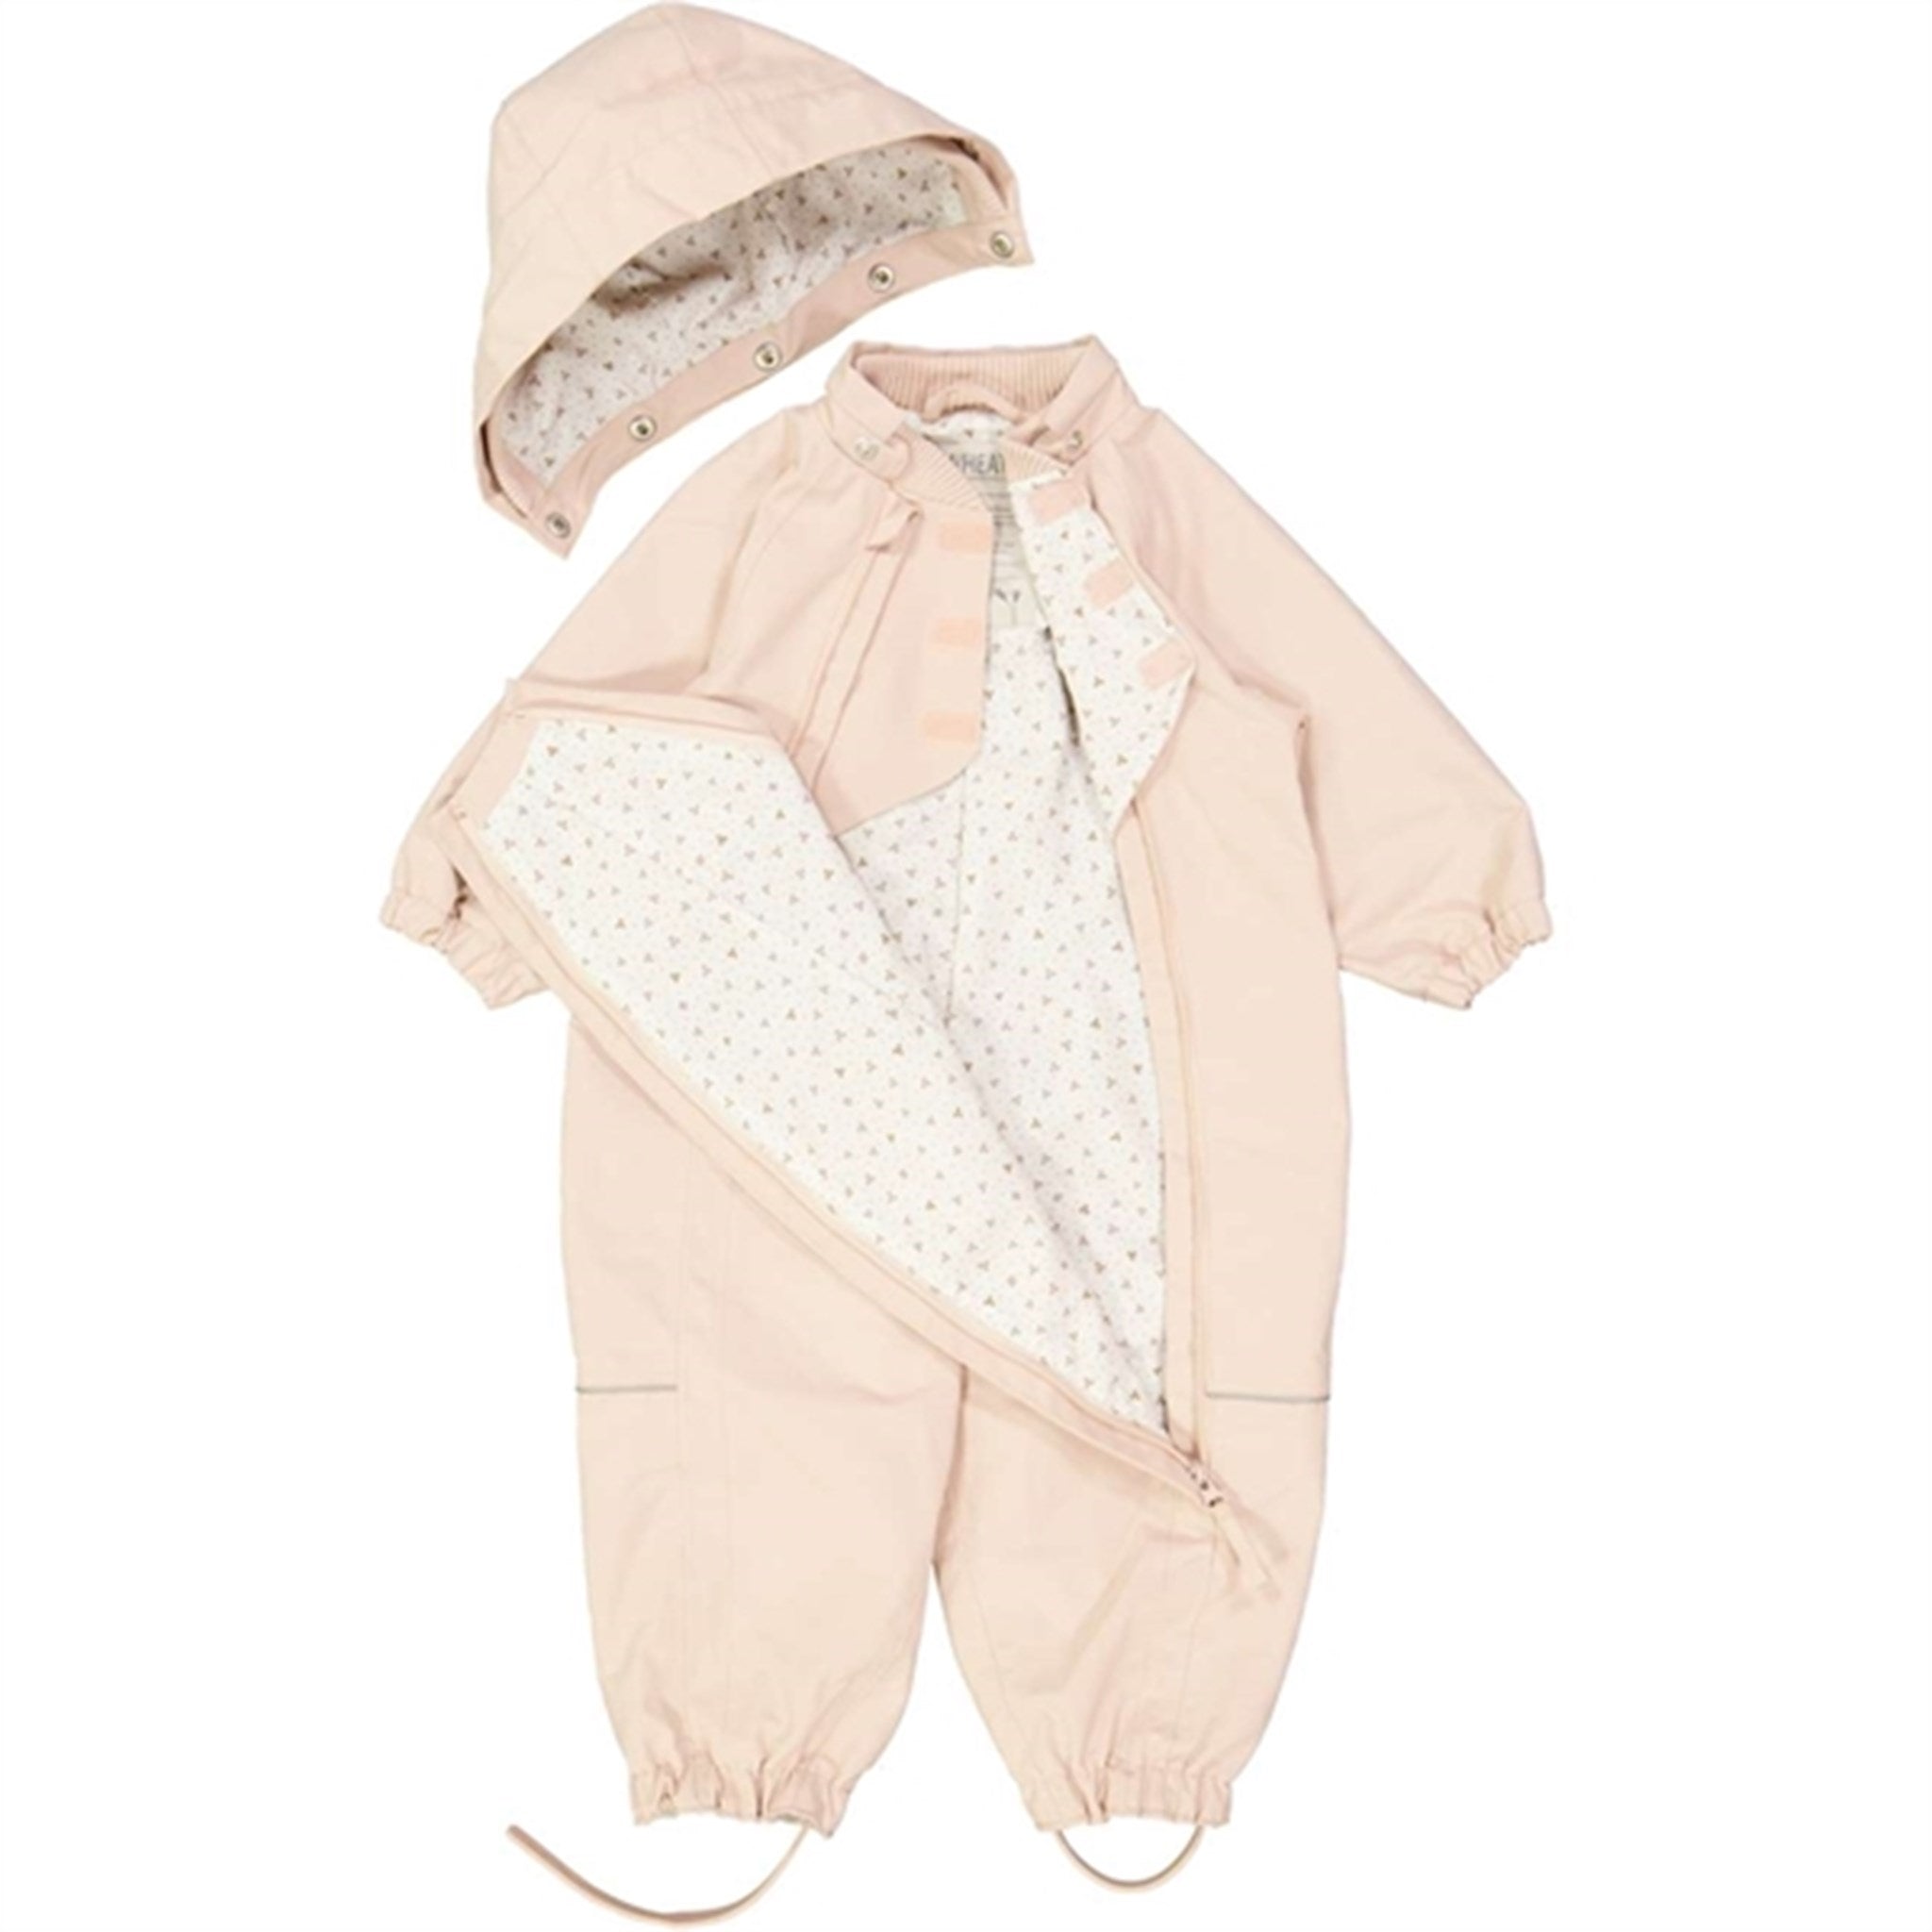 Wheat Outdoor Suit Olly Tech Rose Dust 4